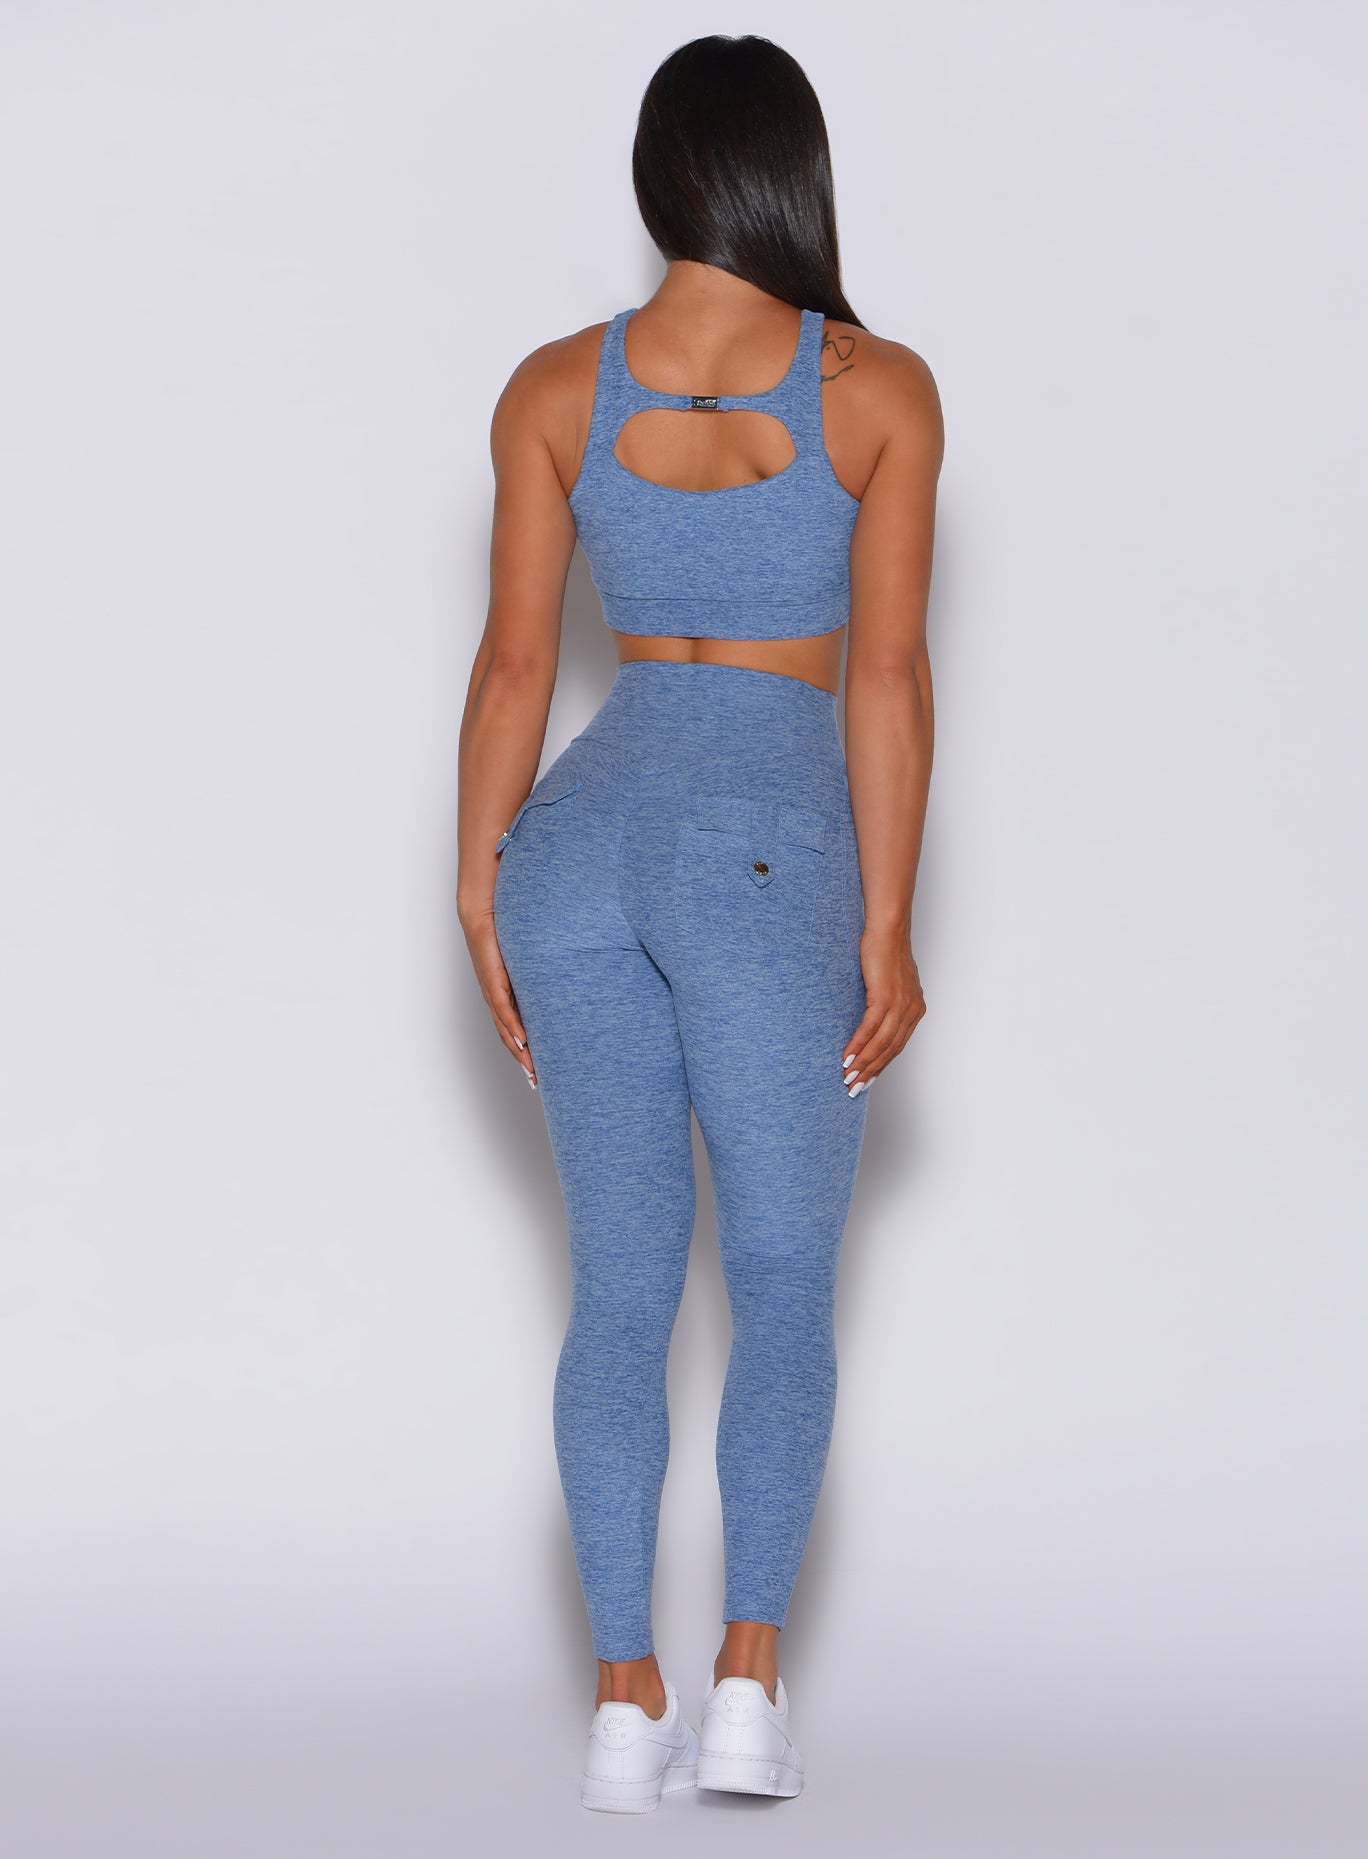 back profile view of a model in our Pocket Pop Leggings in sky blue color and a matching sports bra